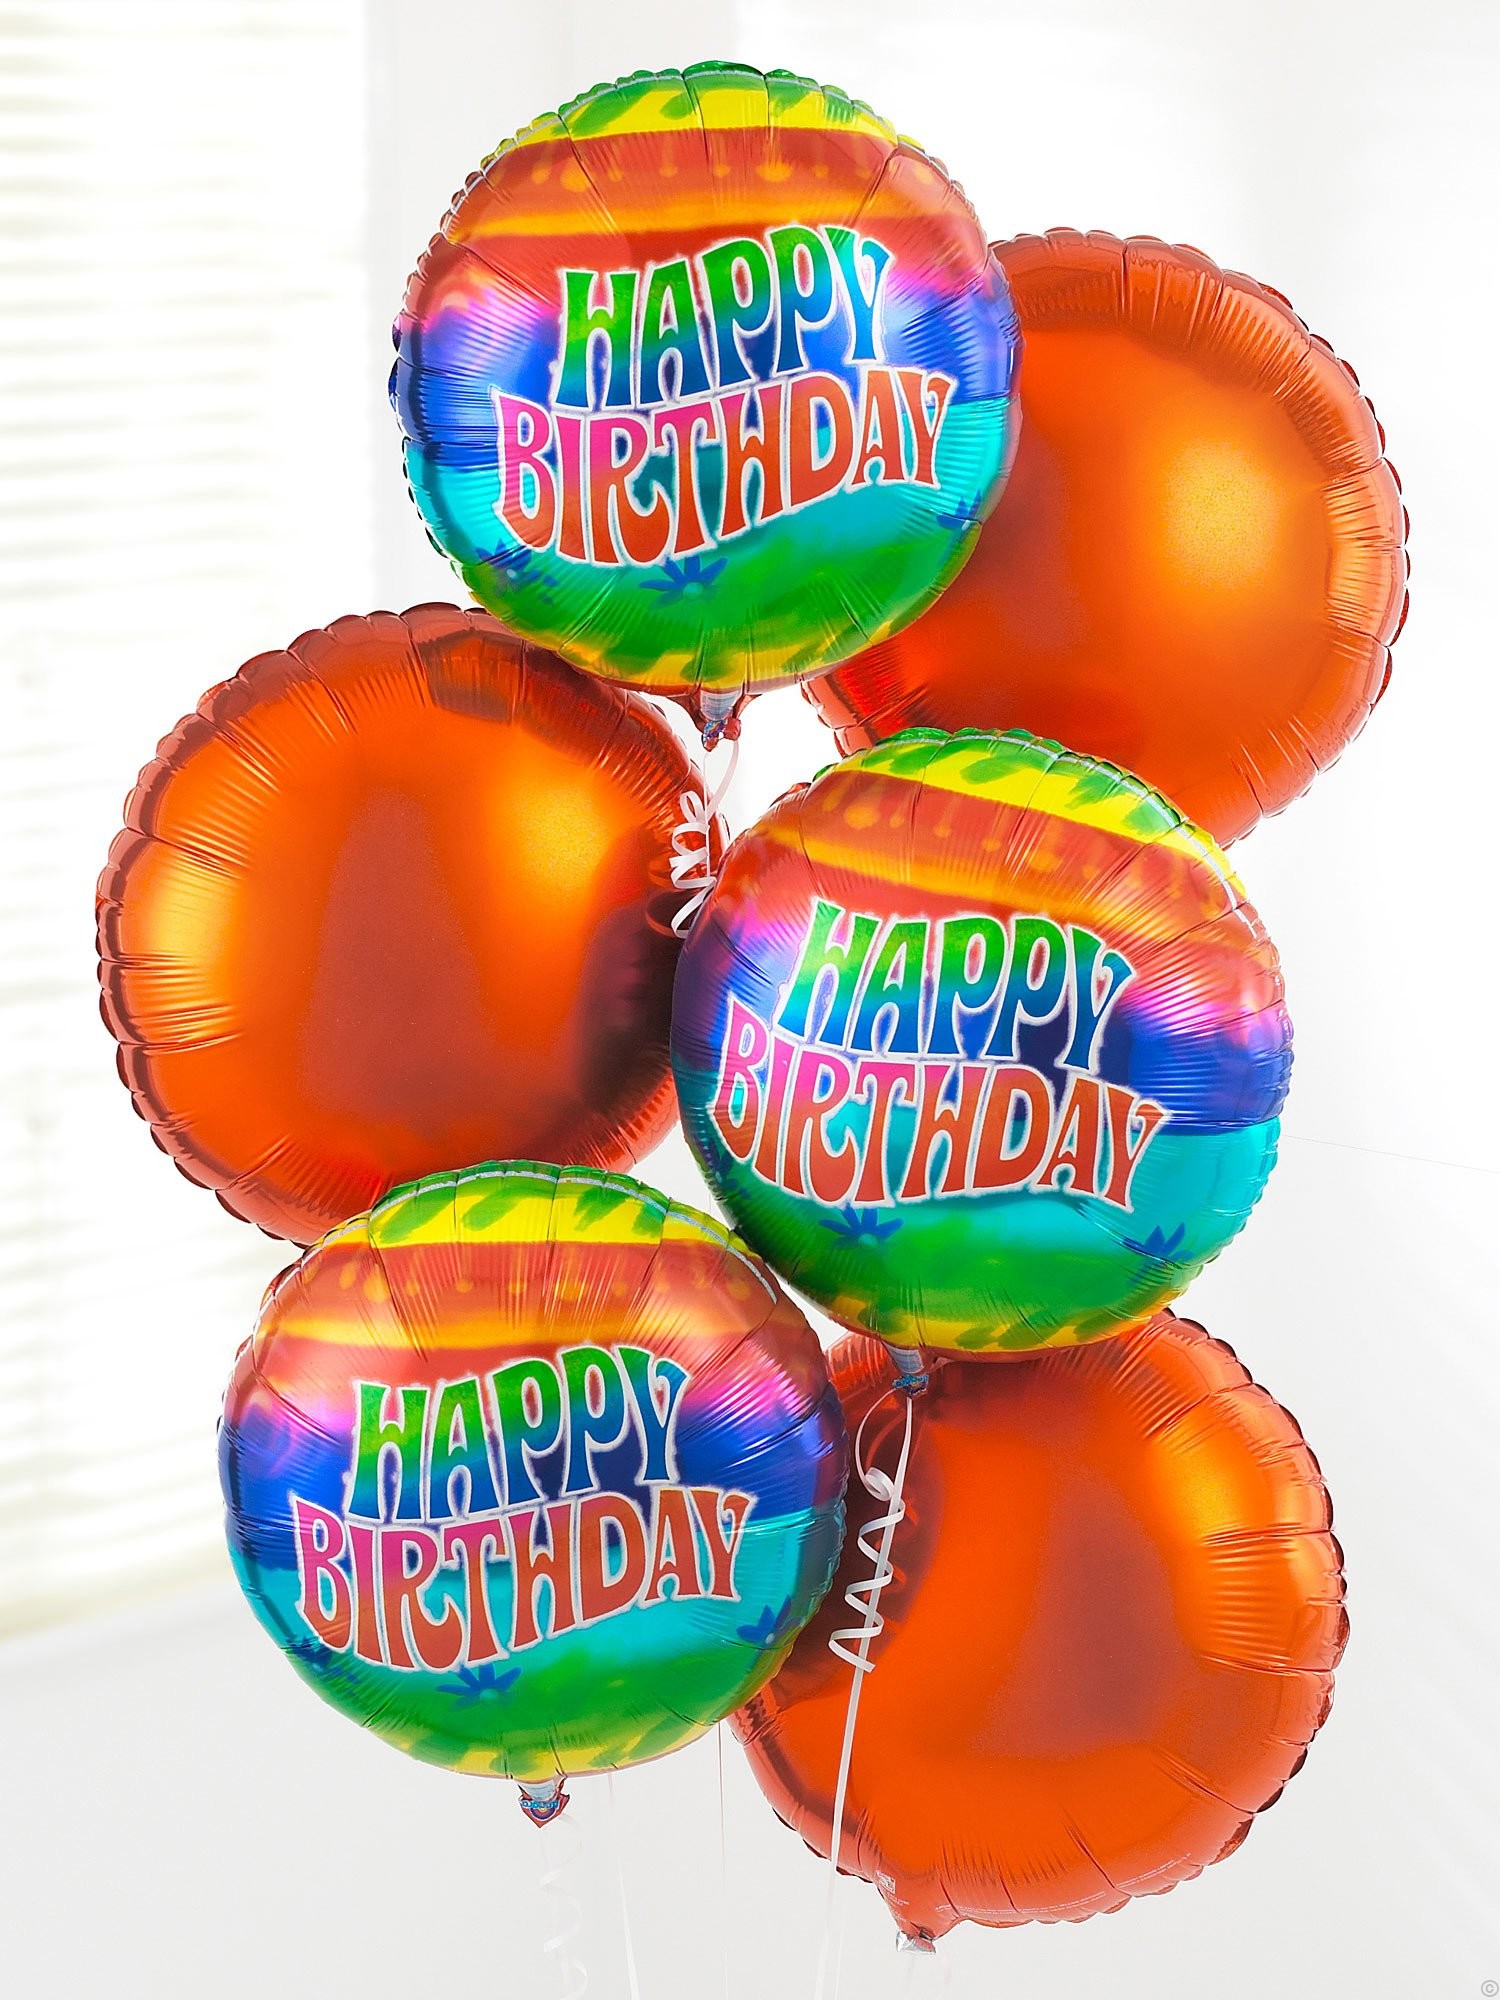 birthday-balloon-images-cliparts-co